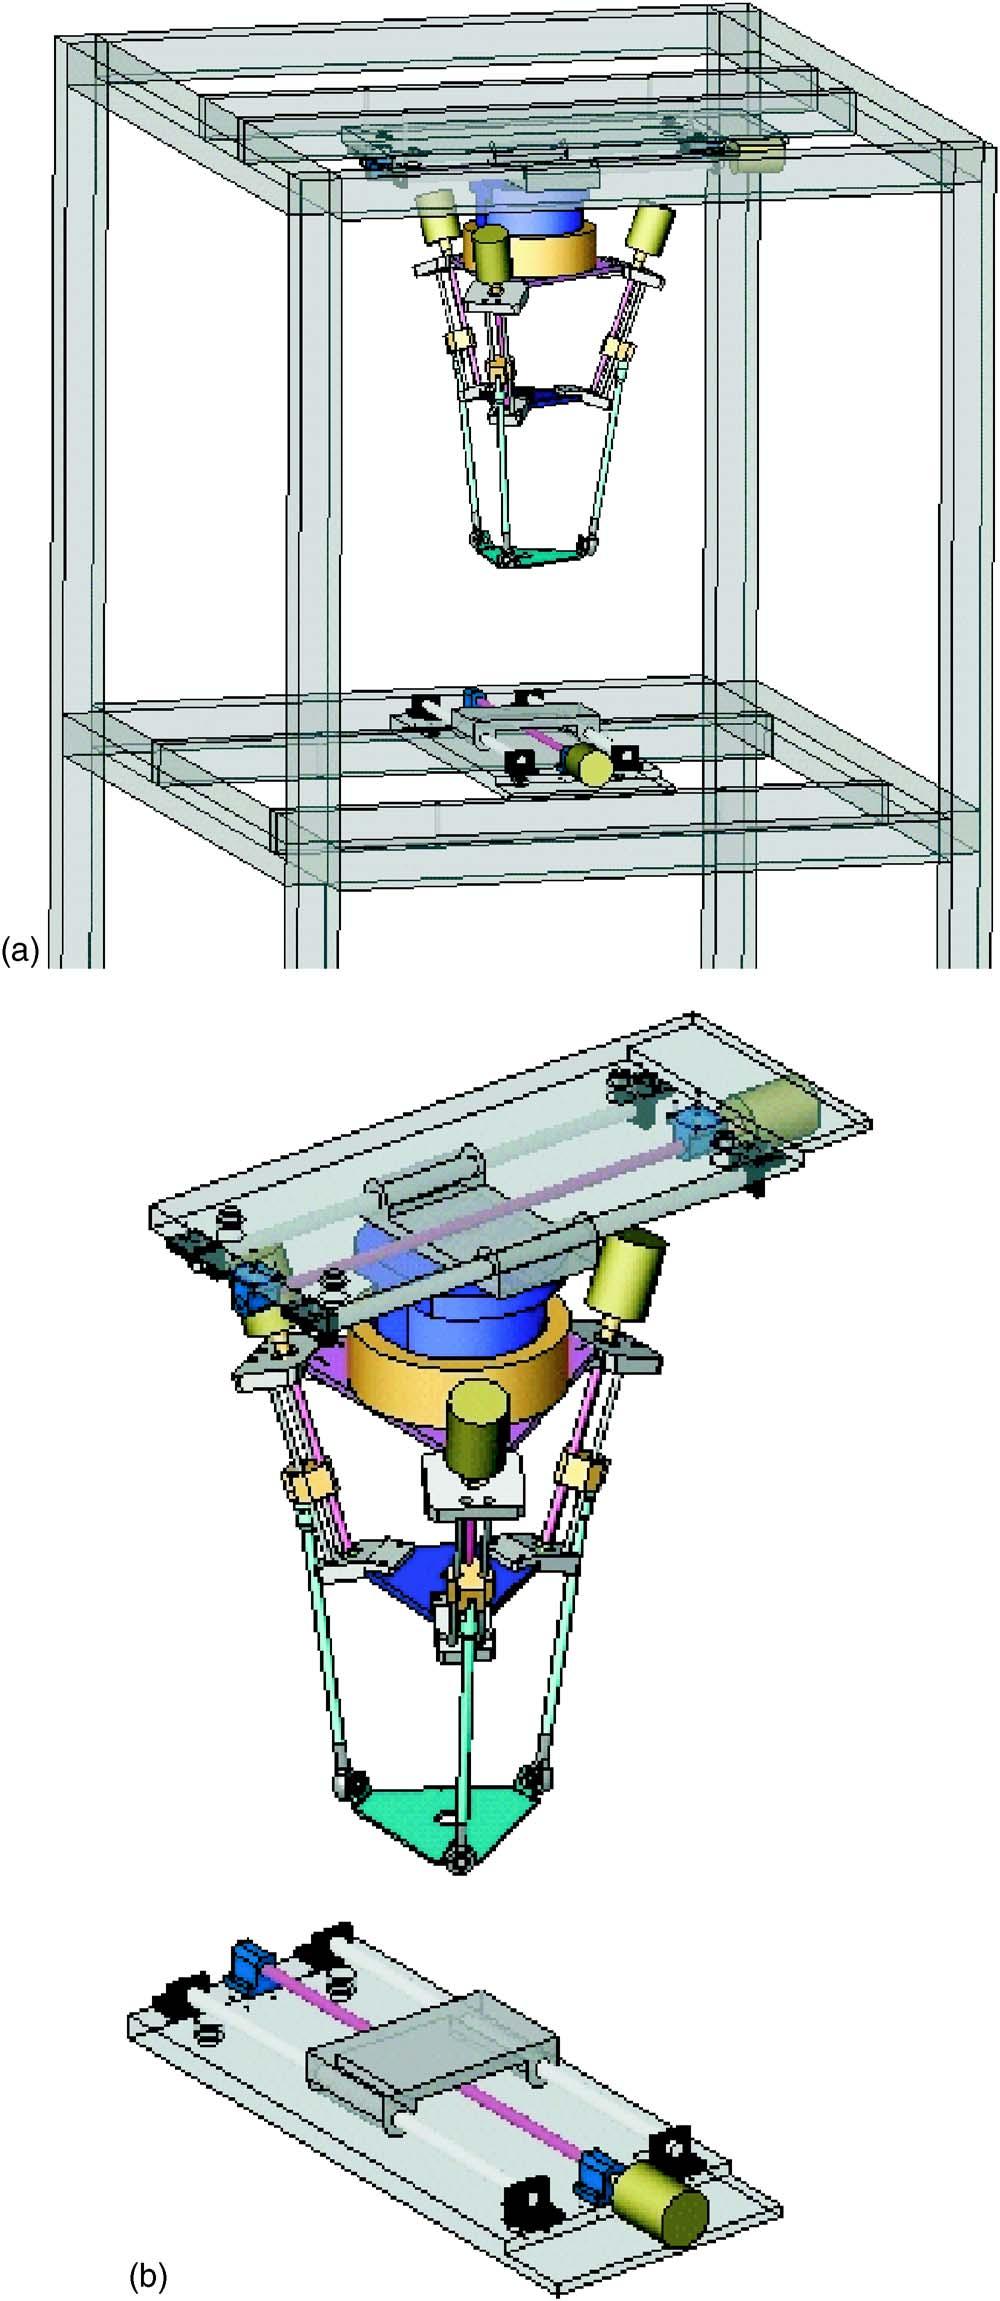 legs. Three types of compliance contribute to deformation of the moving platform, namely, actuator flexibility, leg bending, and axial deformation.